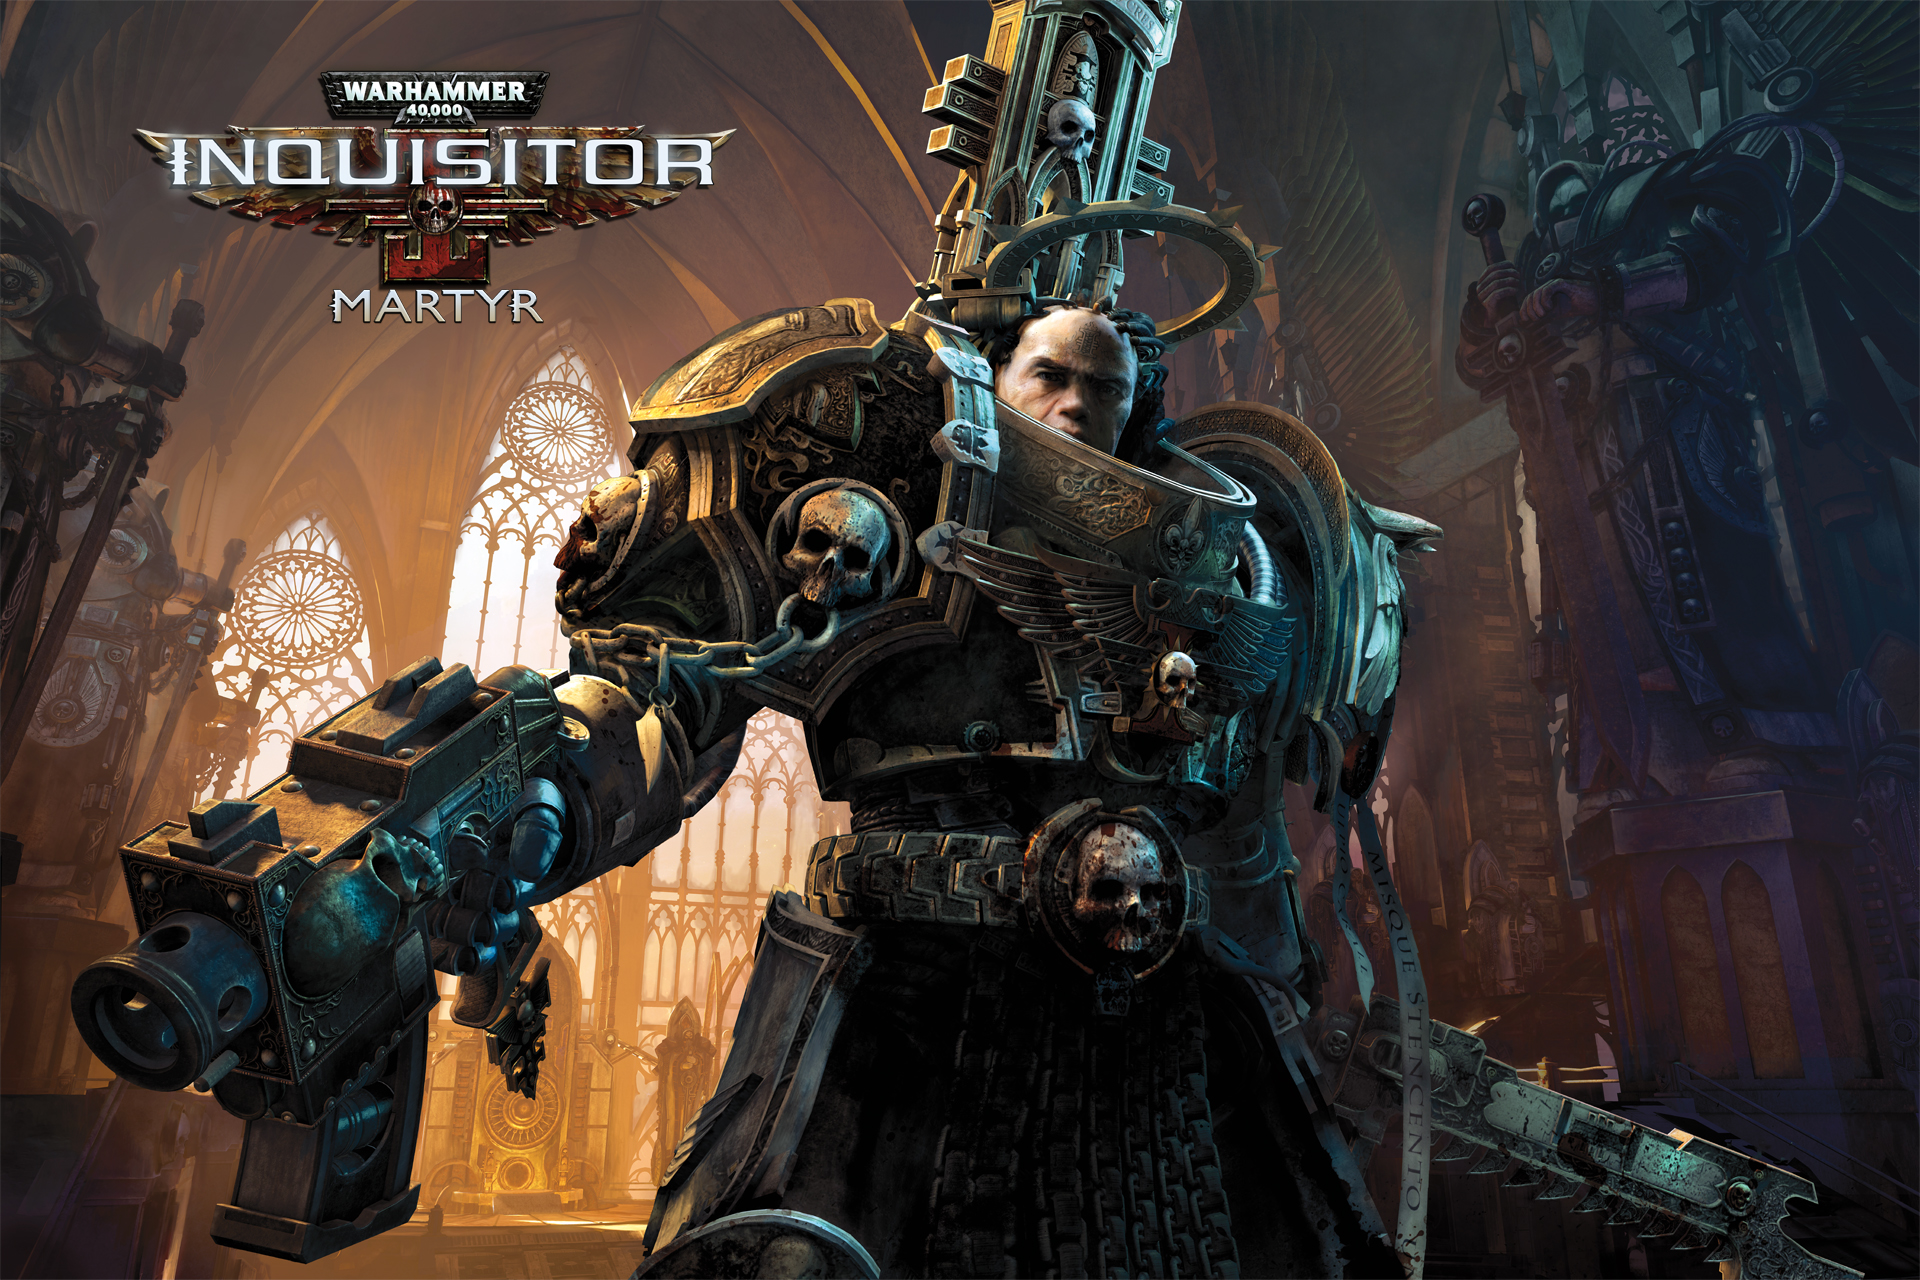 Are There Warhammer 40k Games with Action-RPG Elements?